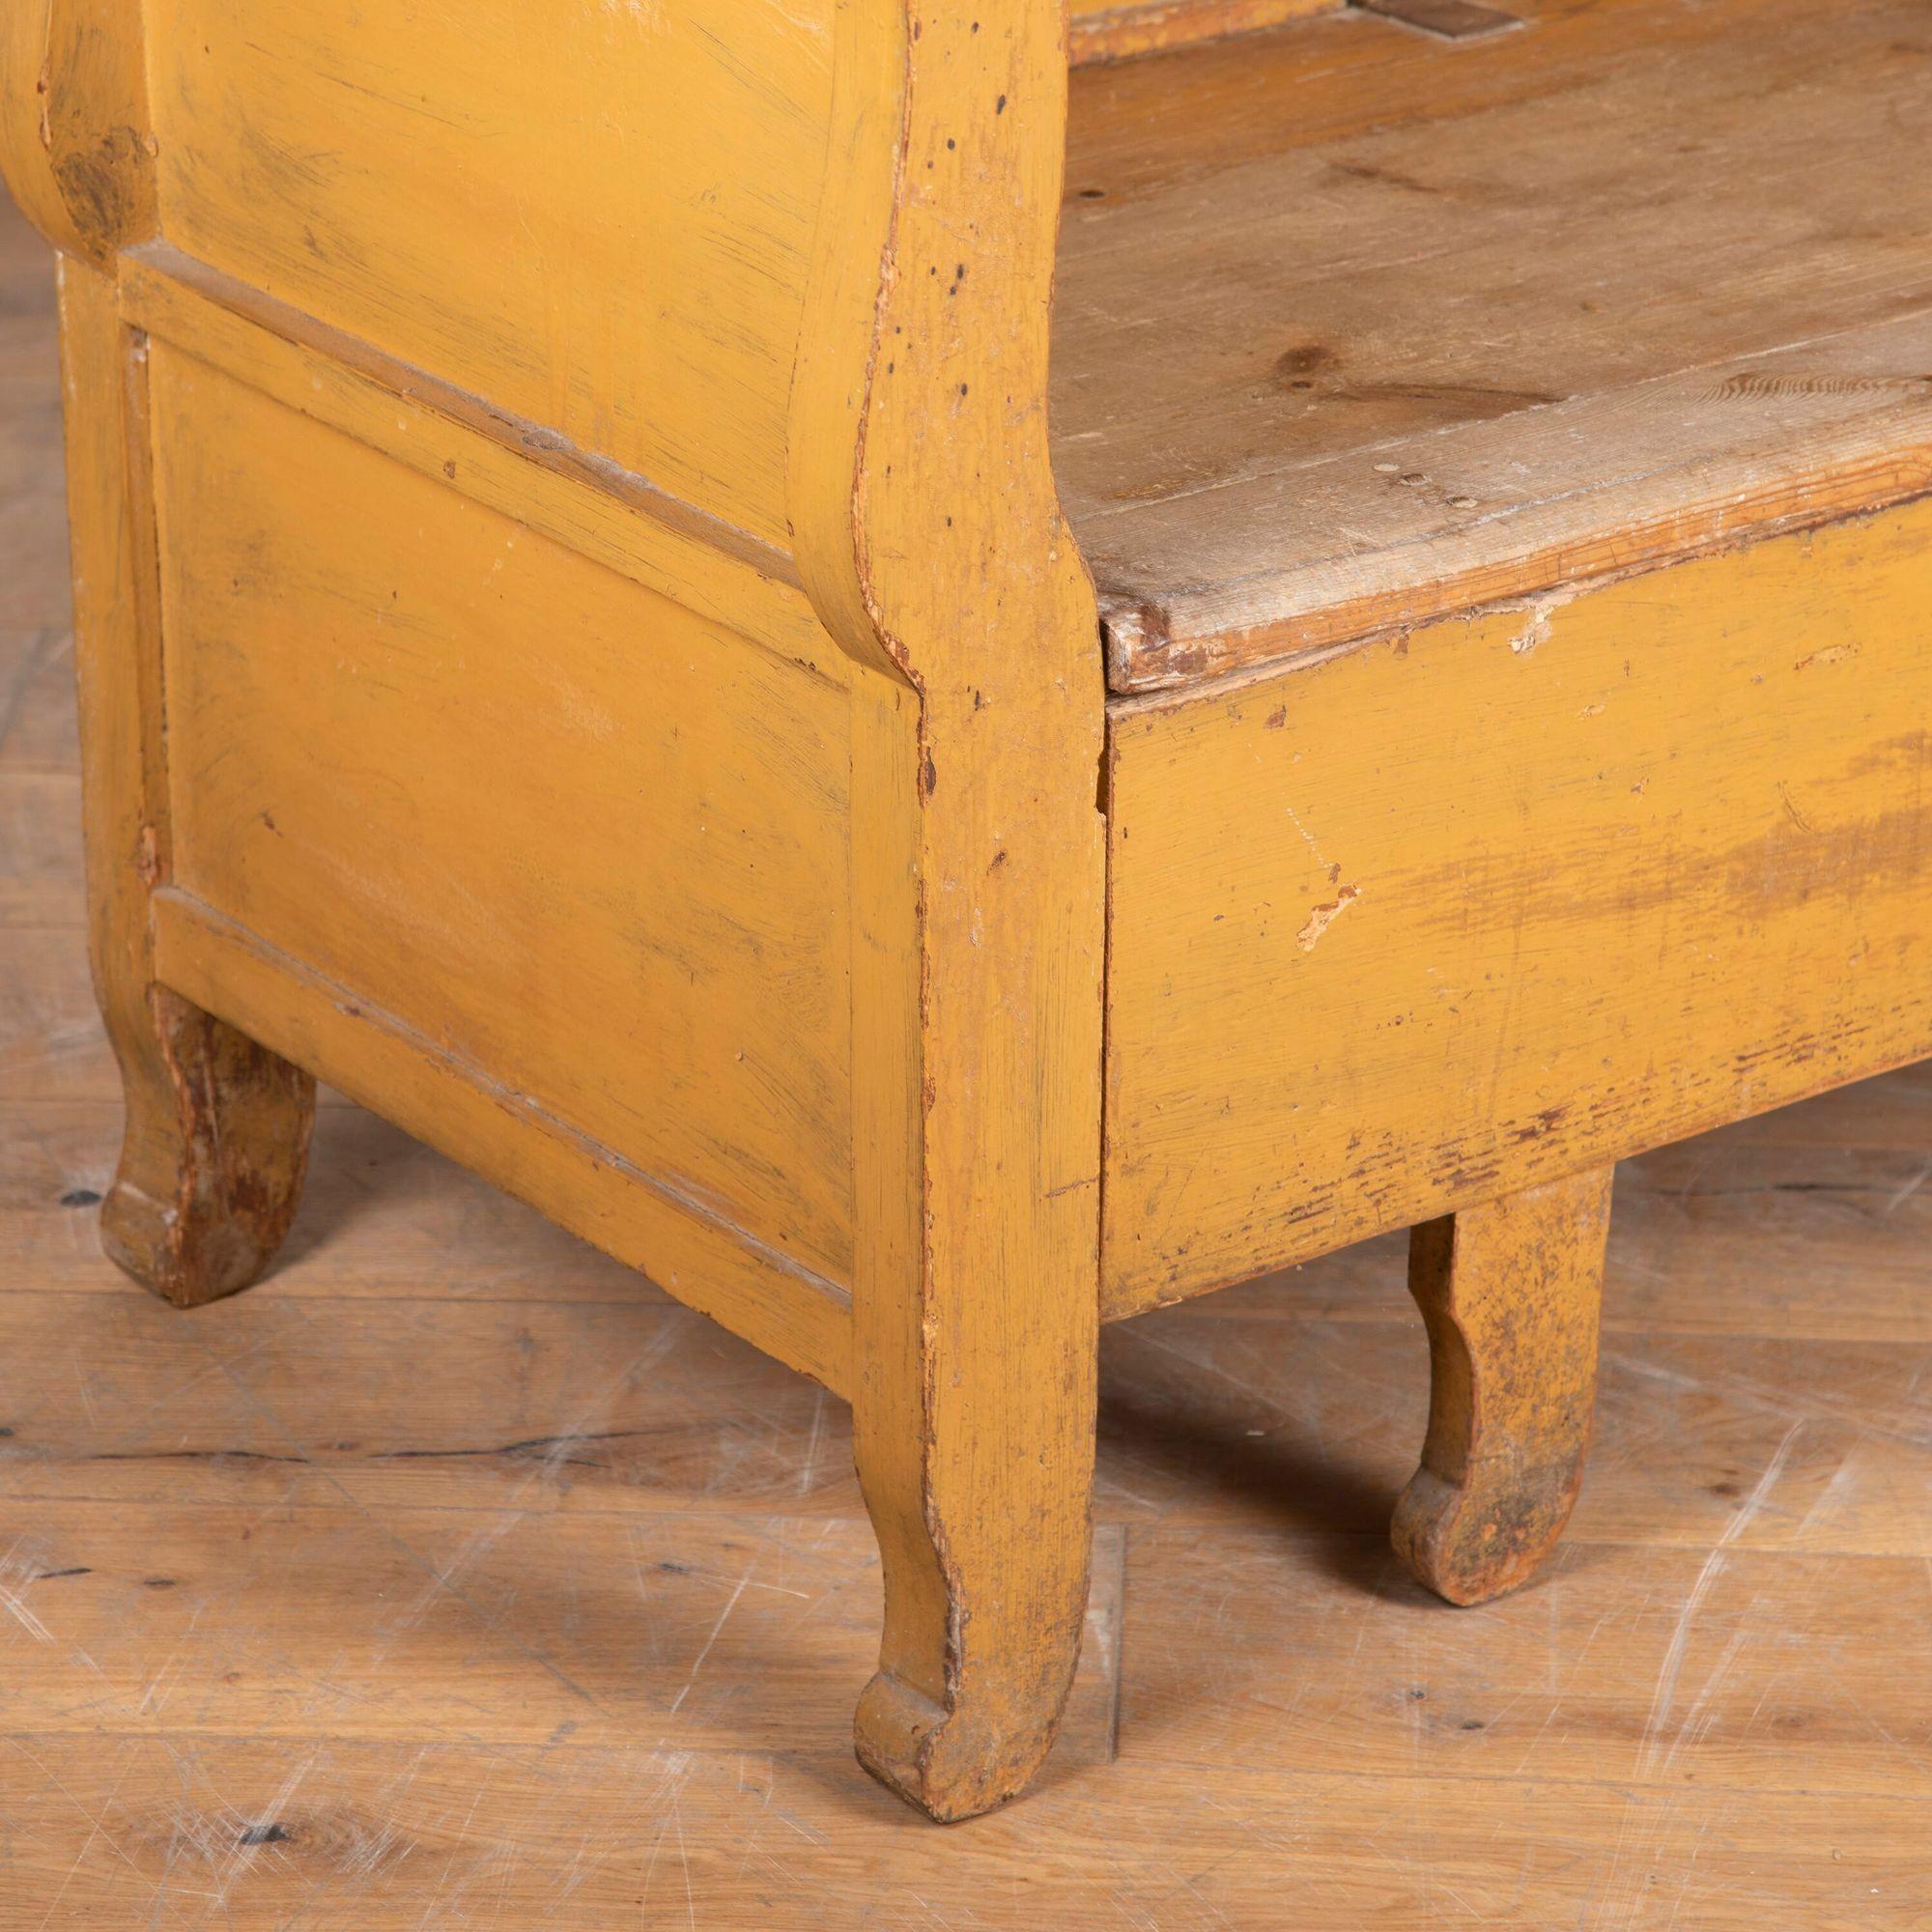 Very attractive Swedish Allmoge farmer’s bench in a warm ochre colour with a natural, time-worn patina.
With beautiful carved detail and attractive legs with a pull-out base for storage.
This is a very heavy piece, perfect for a kitchen or bedroom.